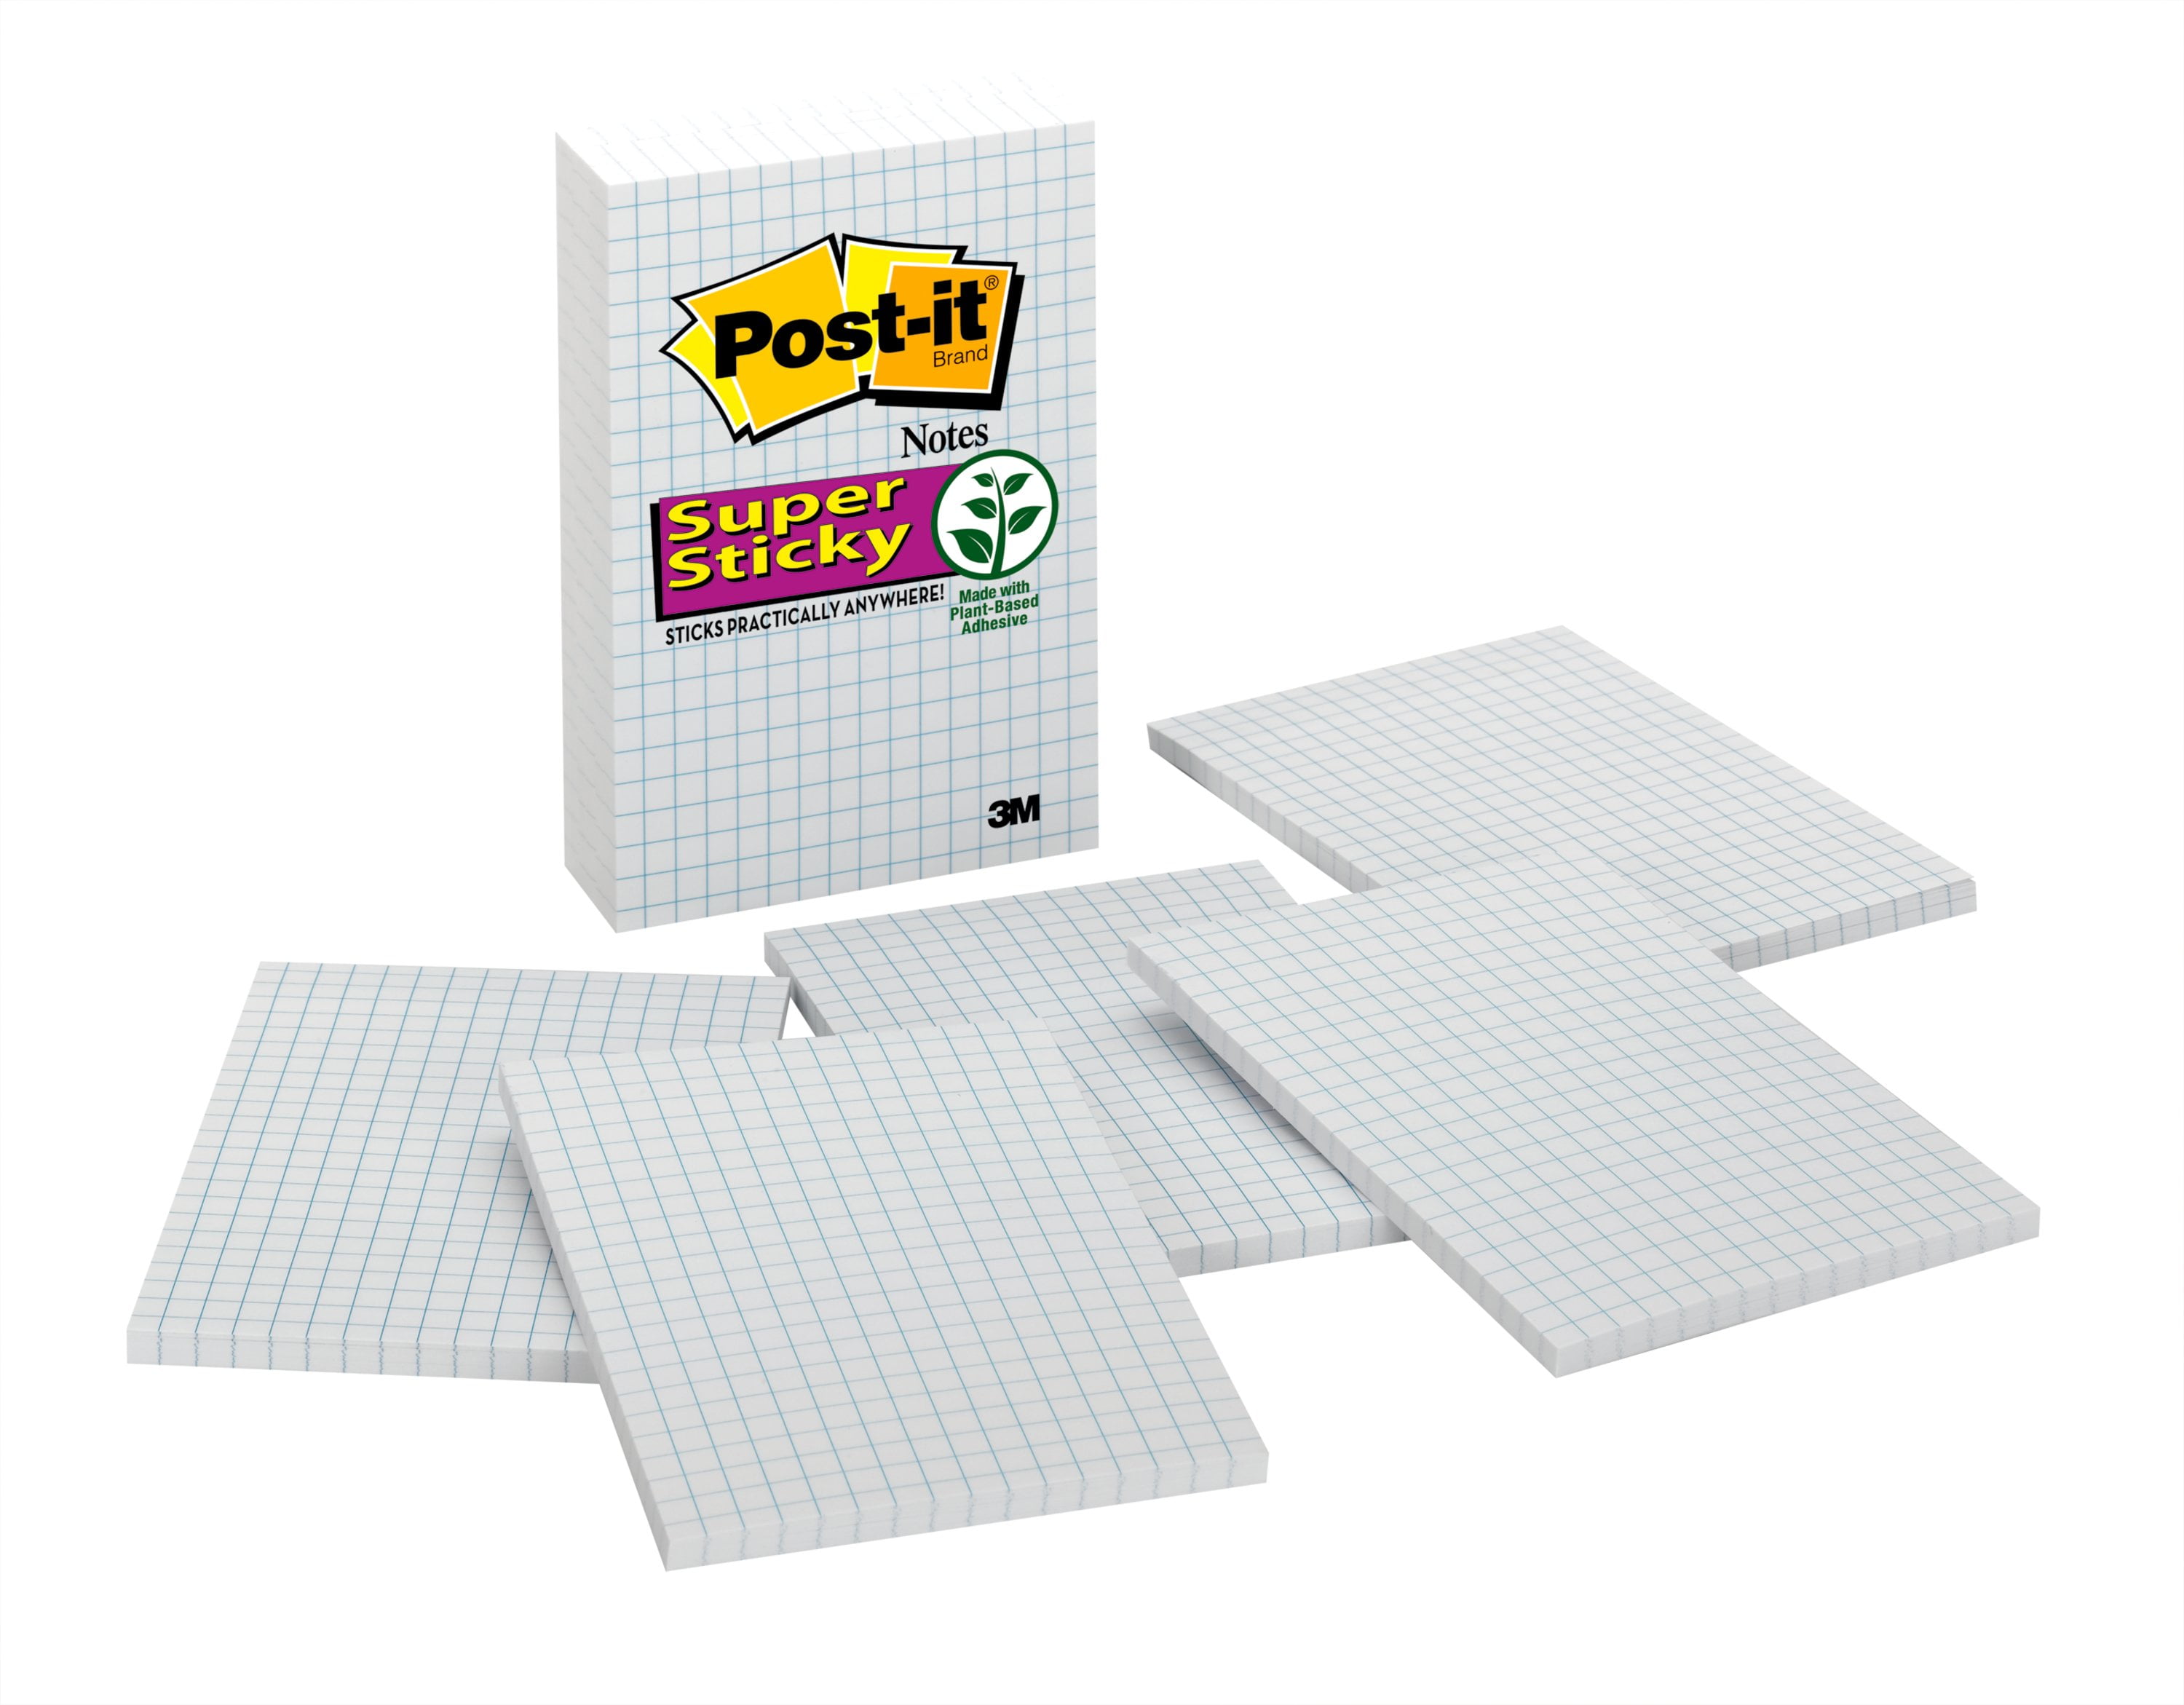 11LYCYL Creatiburg Big Sticky Notes Lined White Color 6x8 inches